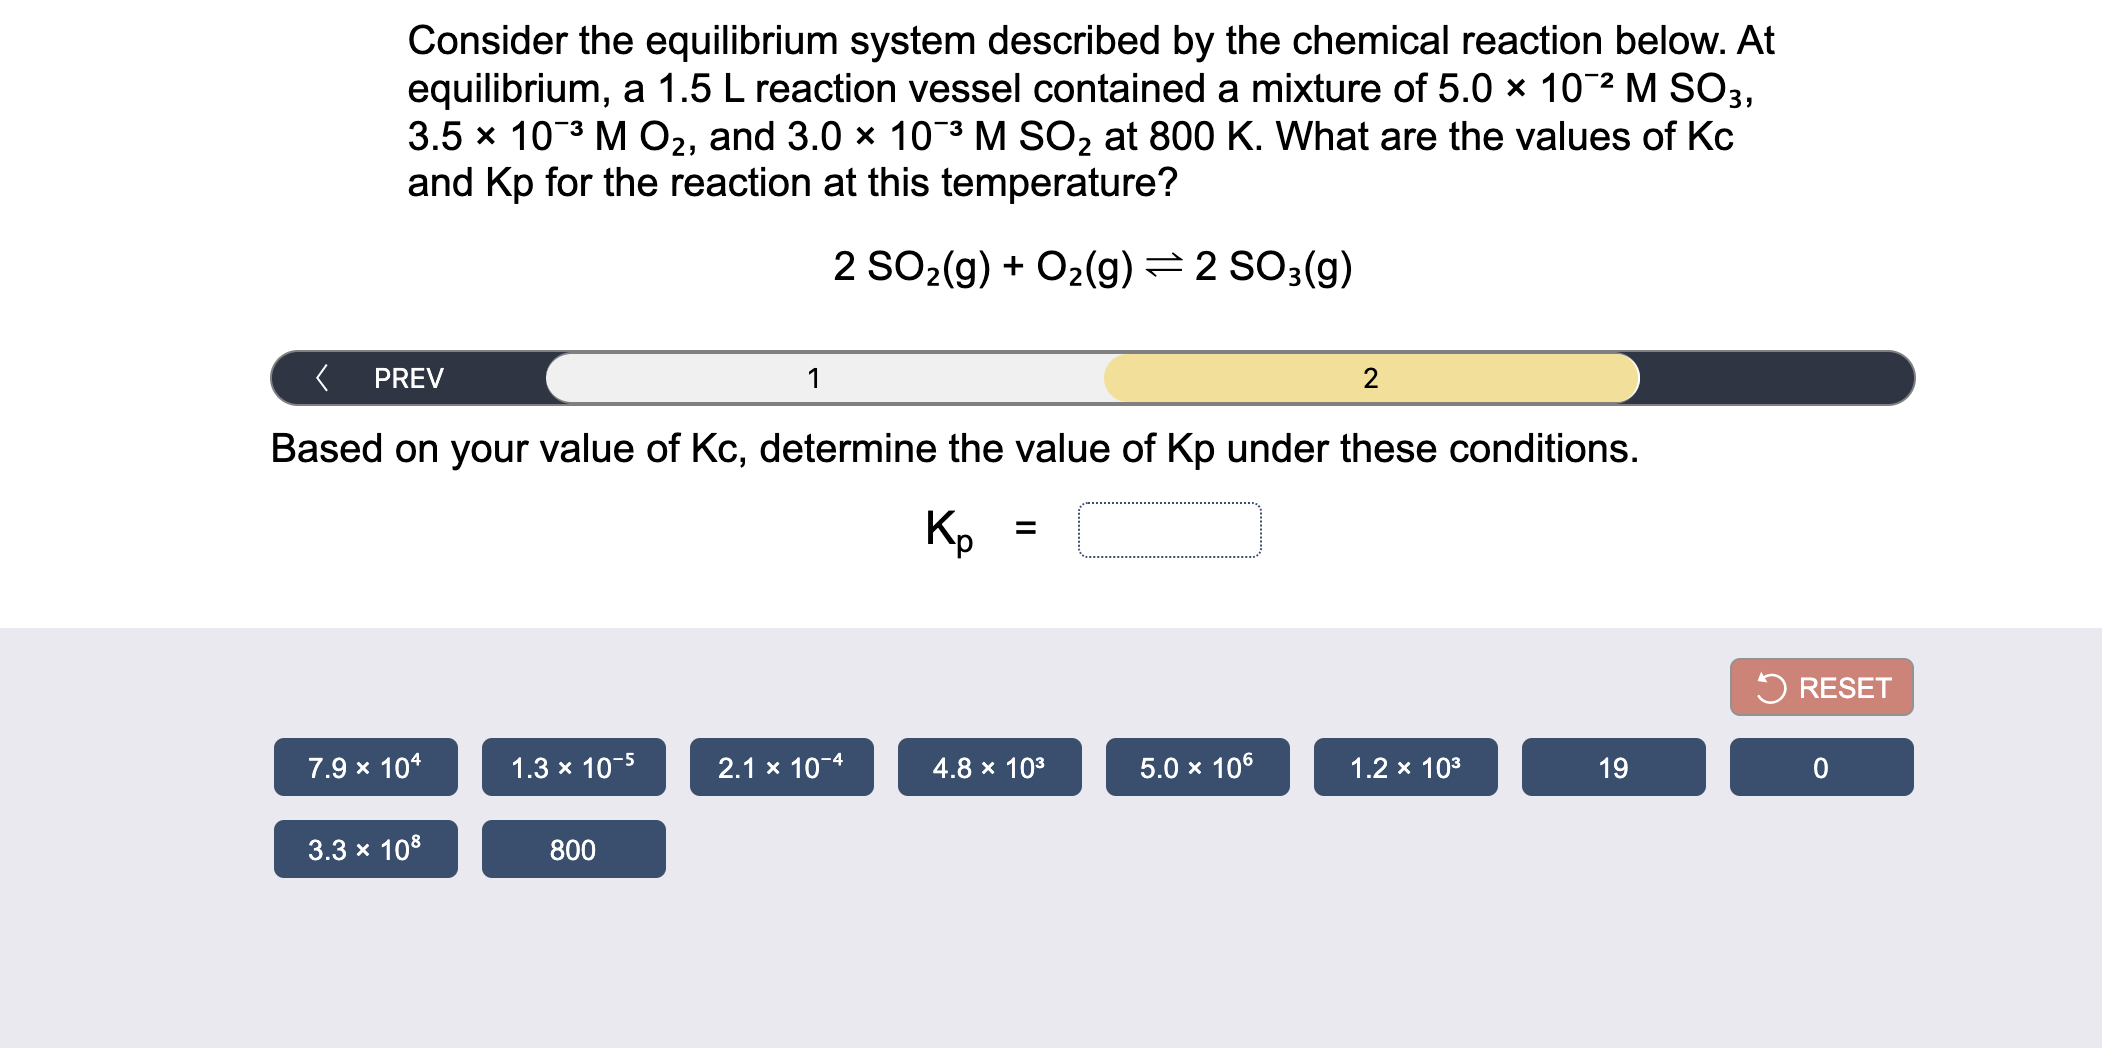 Consider the equilibrium system described by the chemical reaction below. At
equilibrium, a 1.5 L reaction vessel contained a mixture of 5.0 × 10¯2 M SO3,
3.5 x 103 M02, and 3.0 x 10¯3 M SO2 at 800 K. What are the values of Kc
and Kp for the reaction at this temperature?
2 SO2(g) + O2(g)=2 SO3(g)
